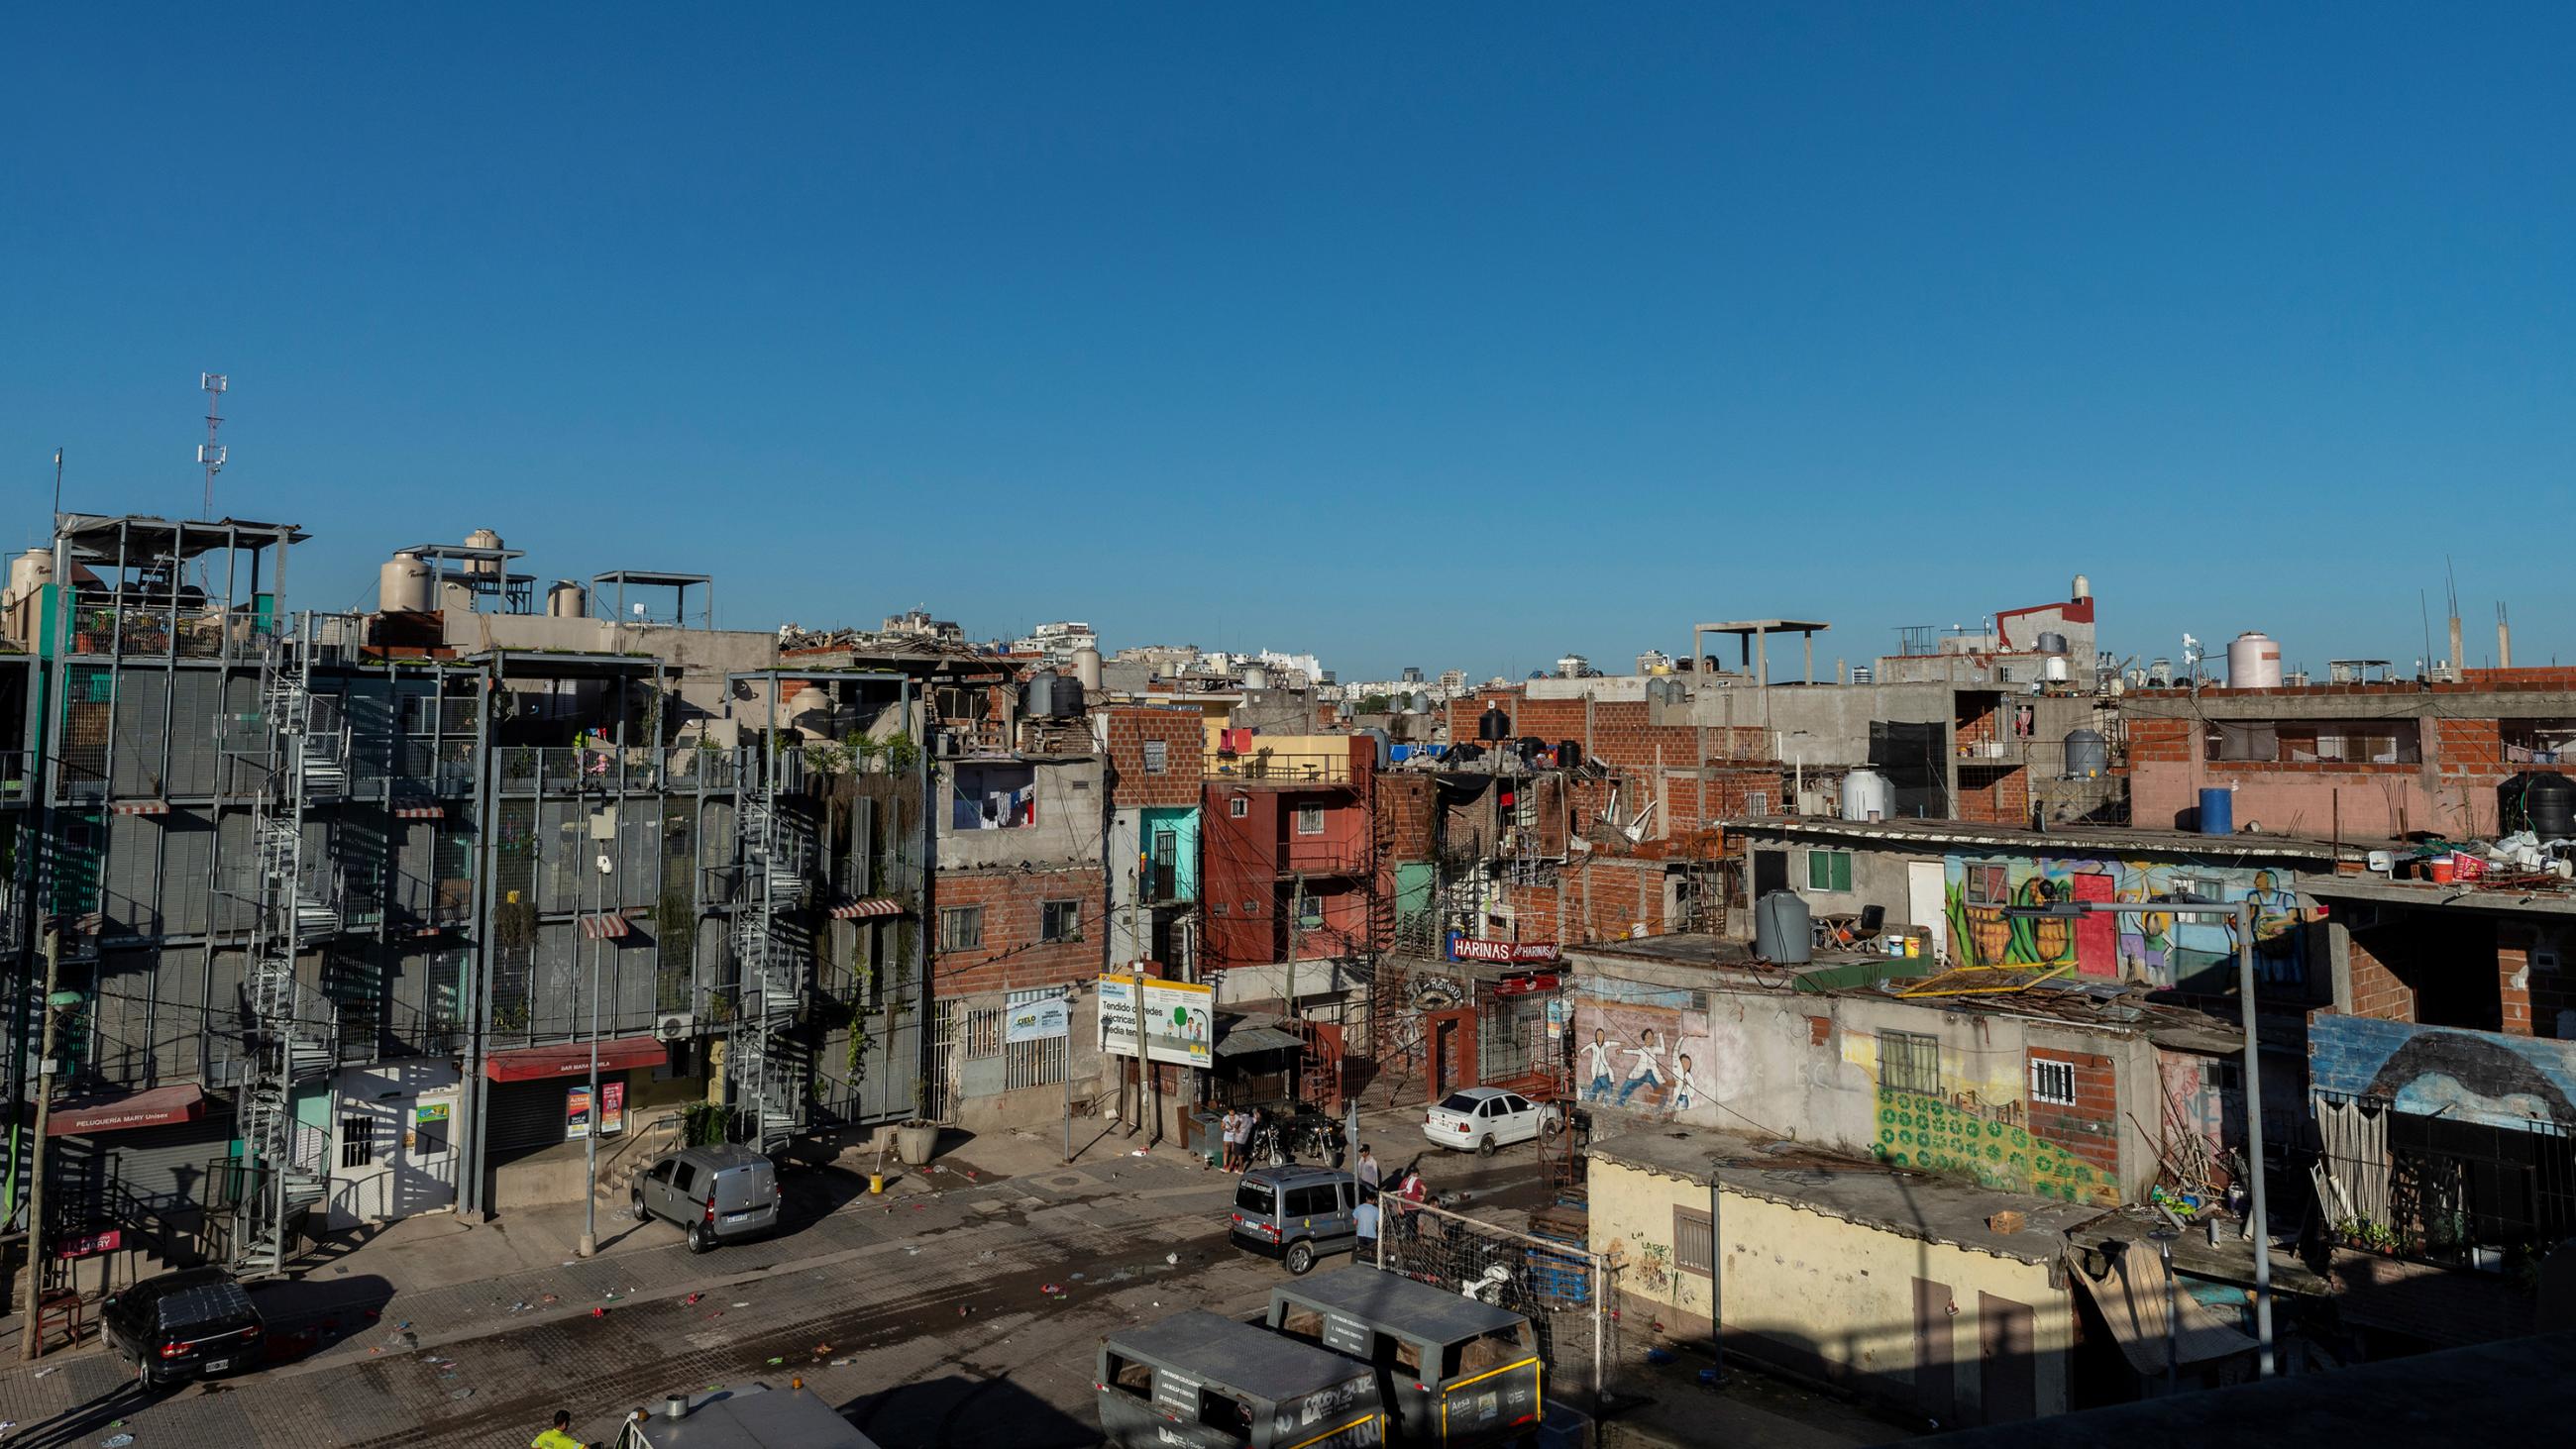 Photo shows a densely-packed brick and concrete community with box-like structures against a brilliant blue sky. 